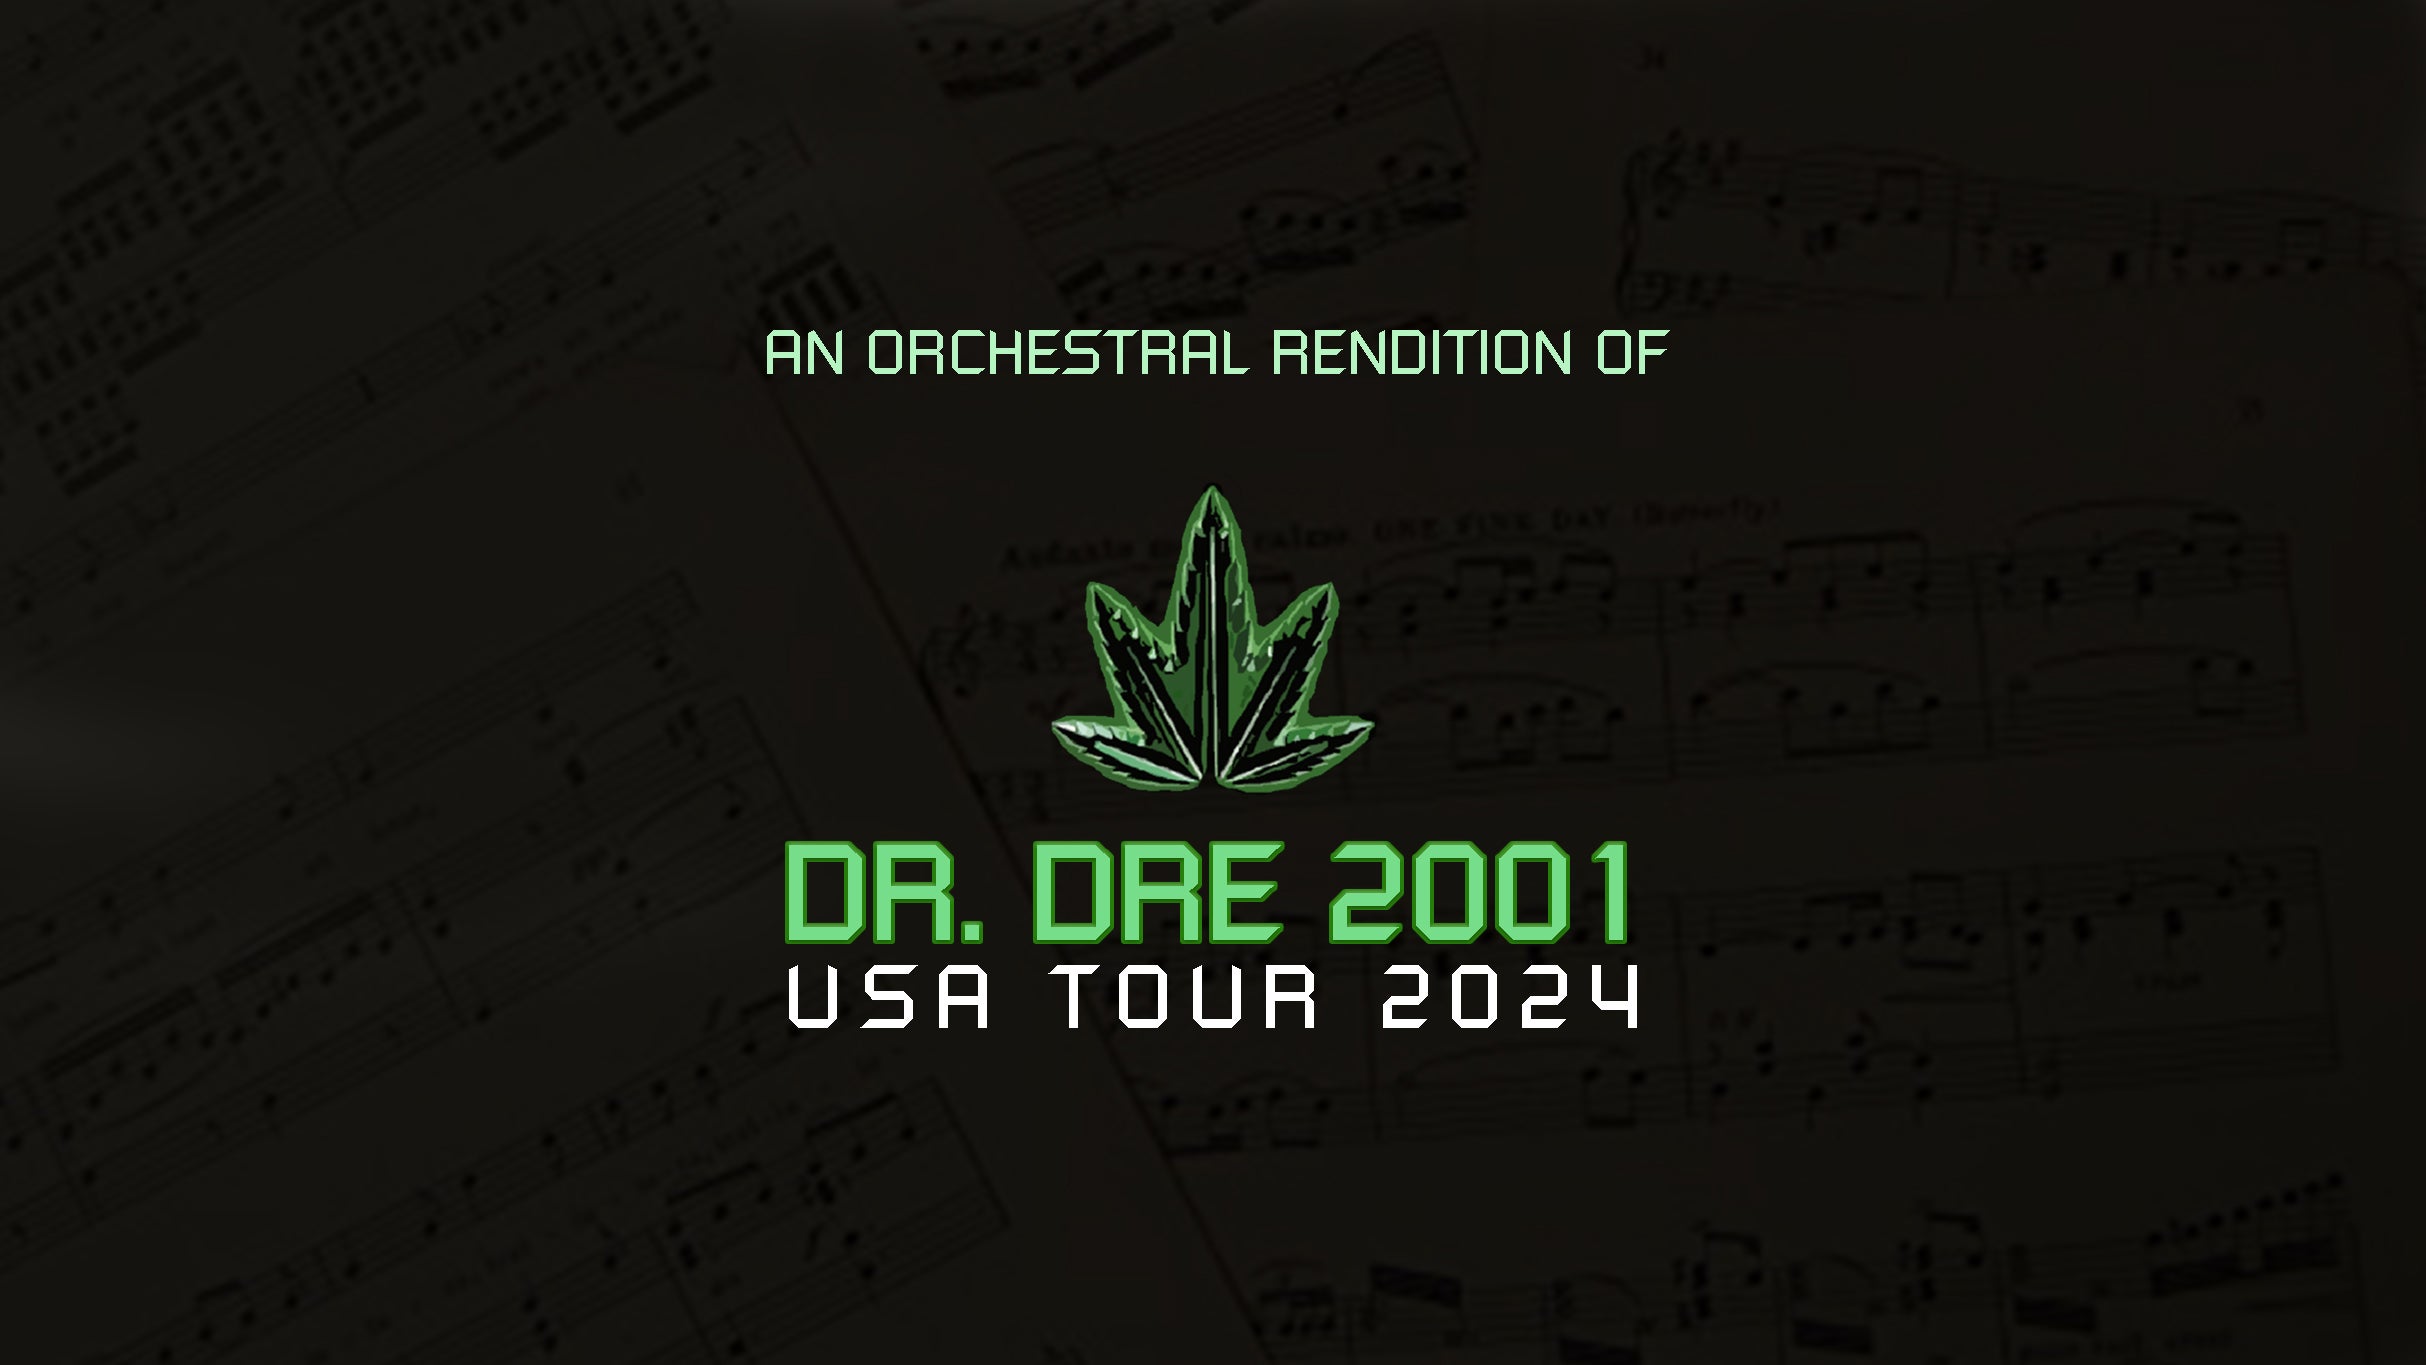 An Orchestral Rendition of Dr Dre 2001 at Brooklyn Bowl-NY